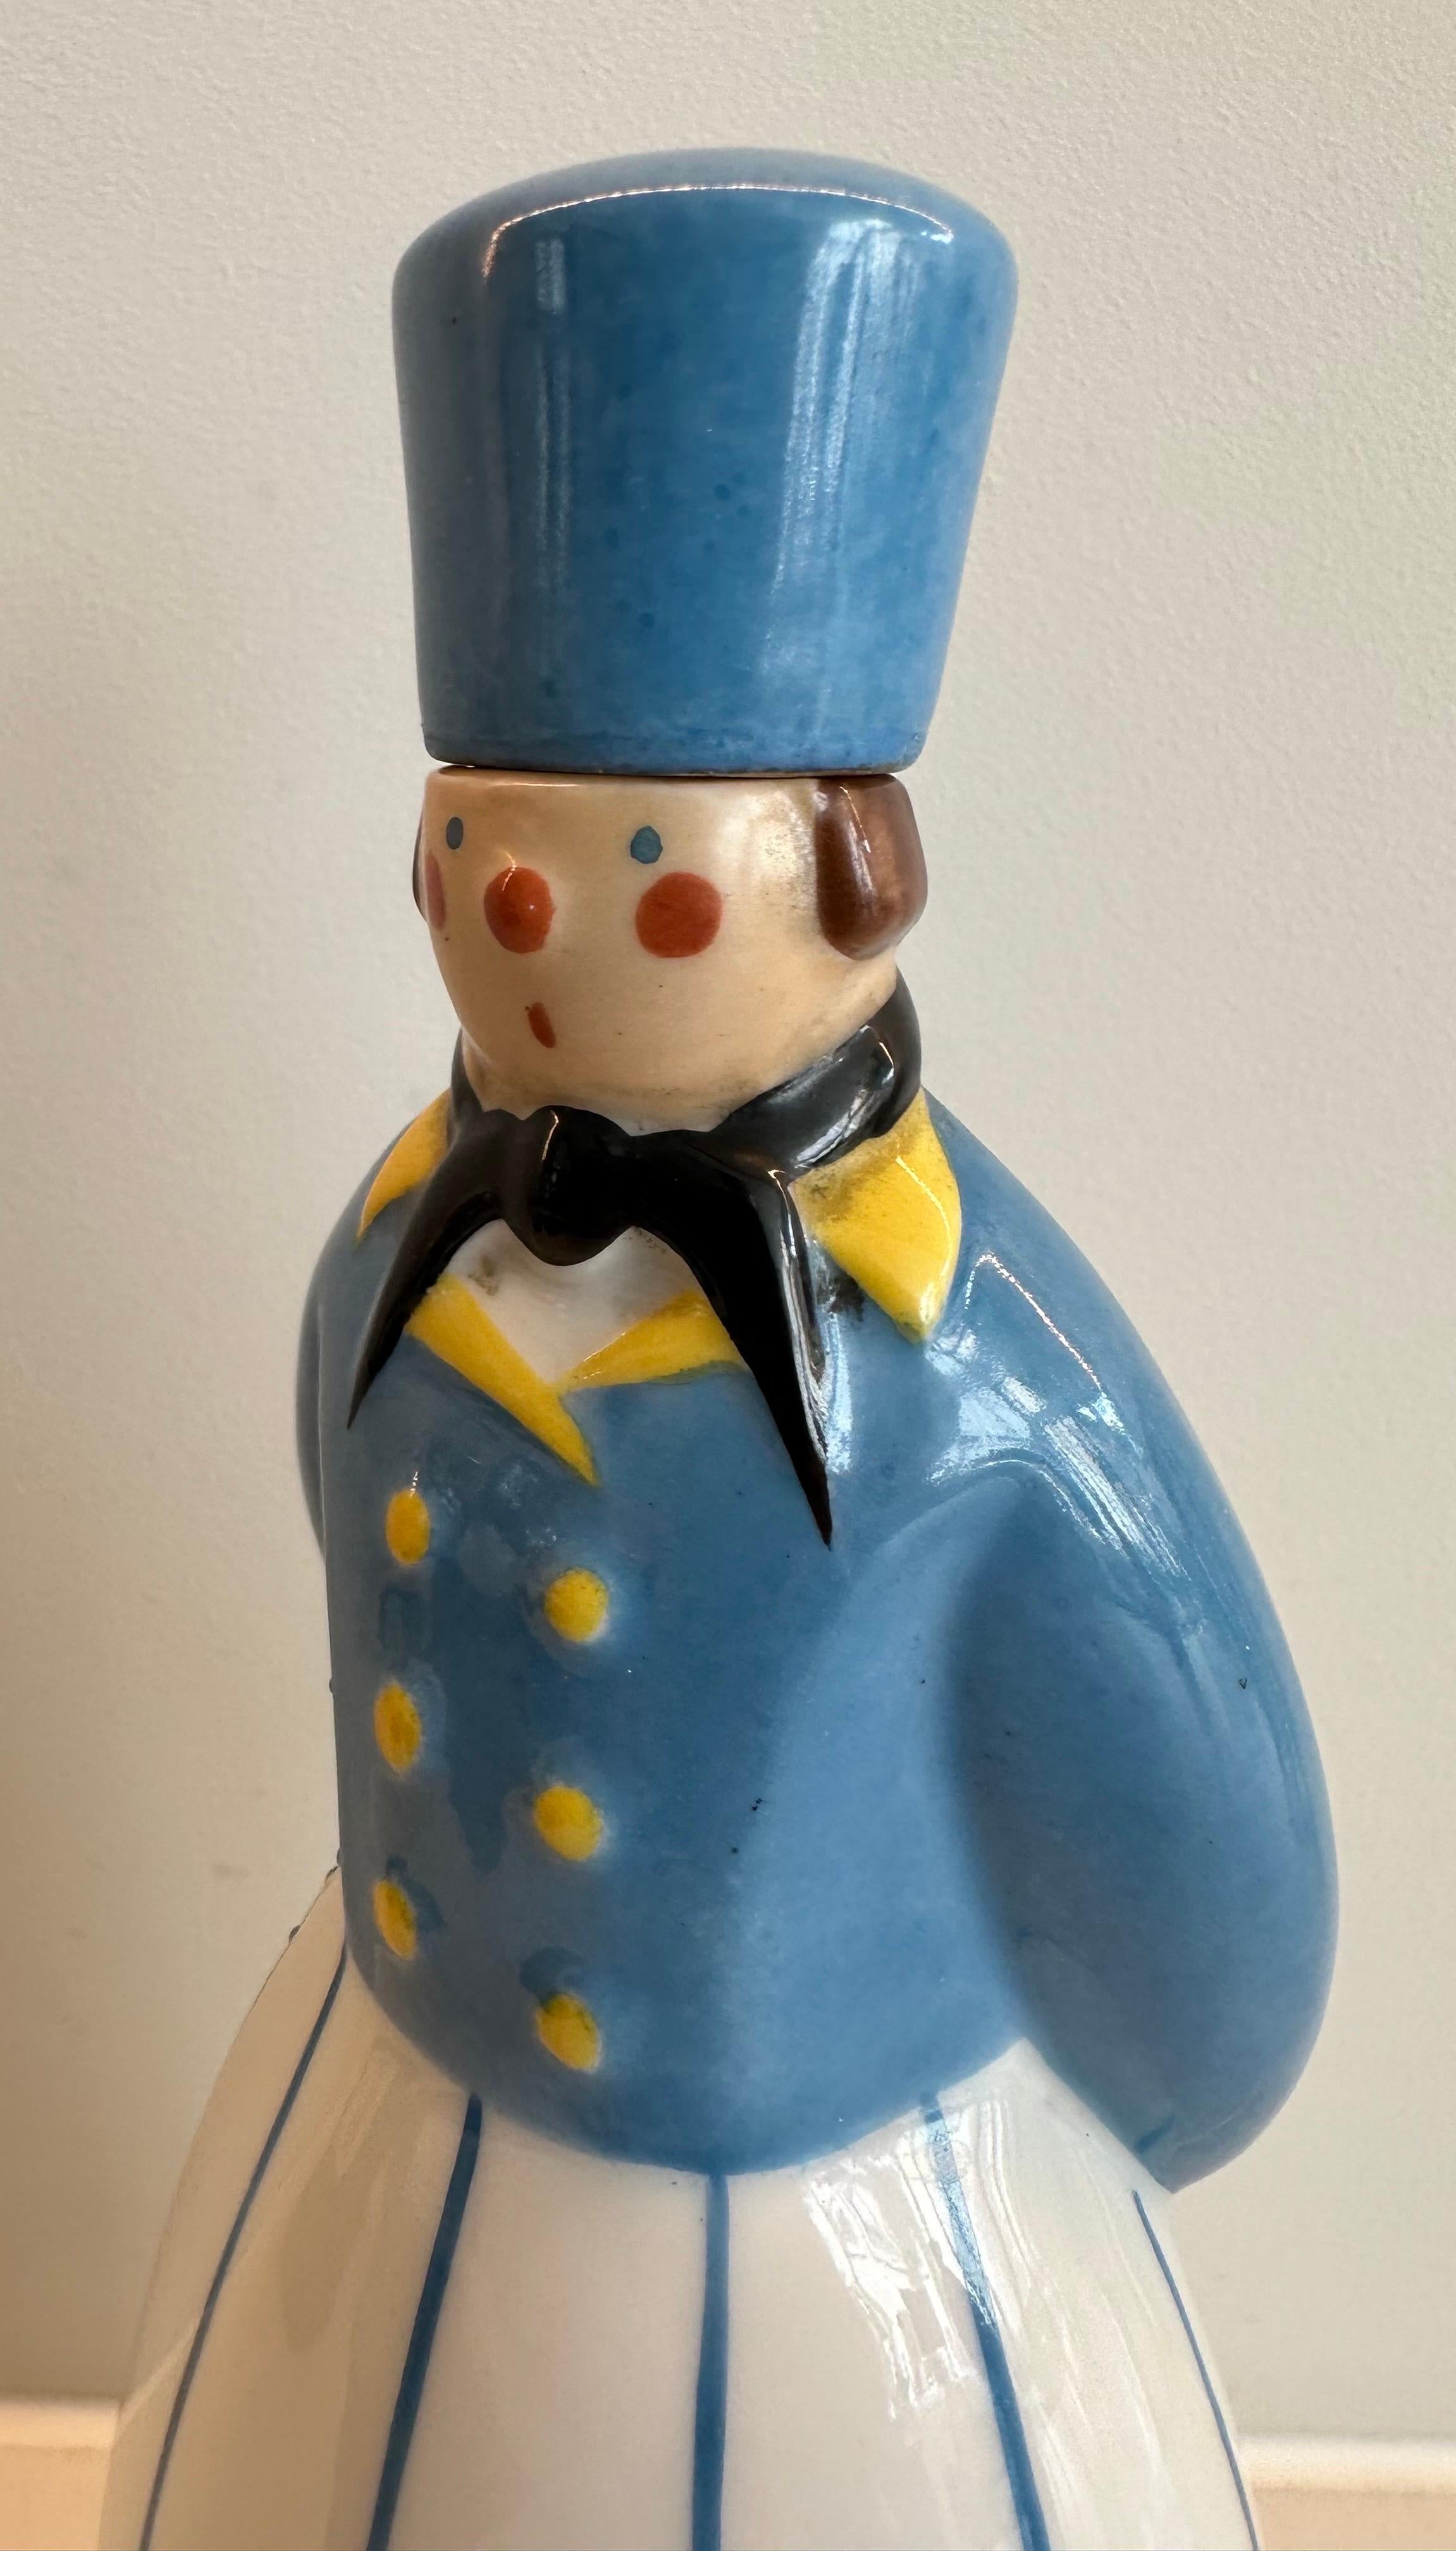 Art Deco 1930s French “Curacao” Figural Russian Soldier Flask by Robj Paris In Good Condition For Sale In London, GB